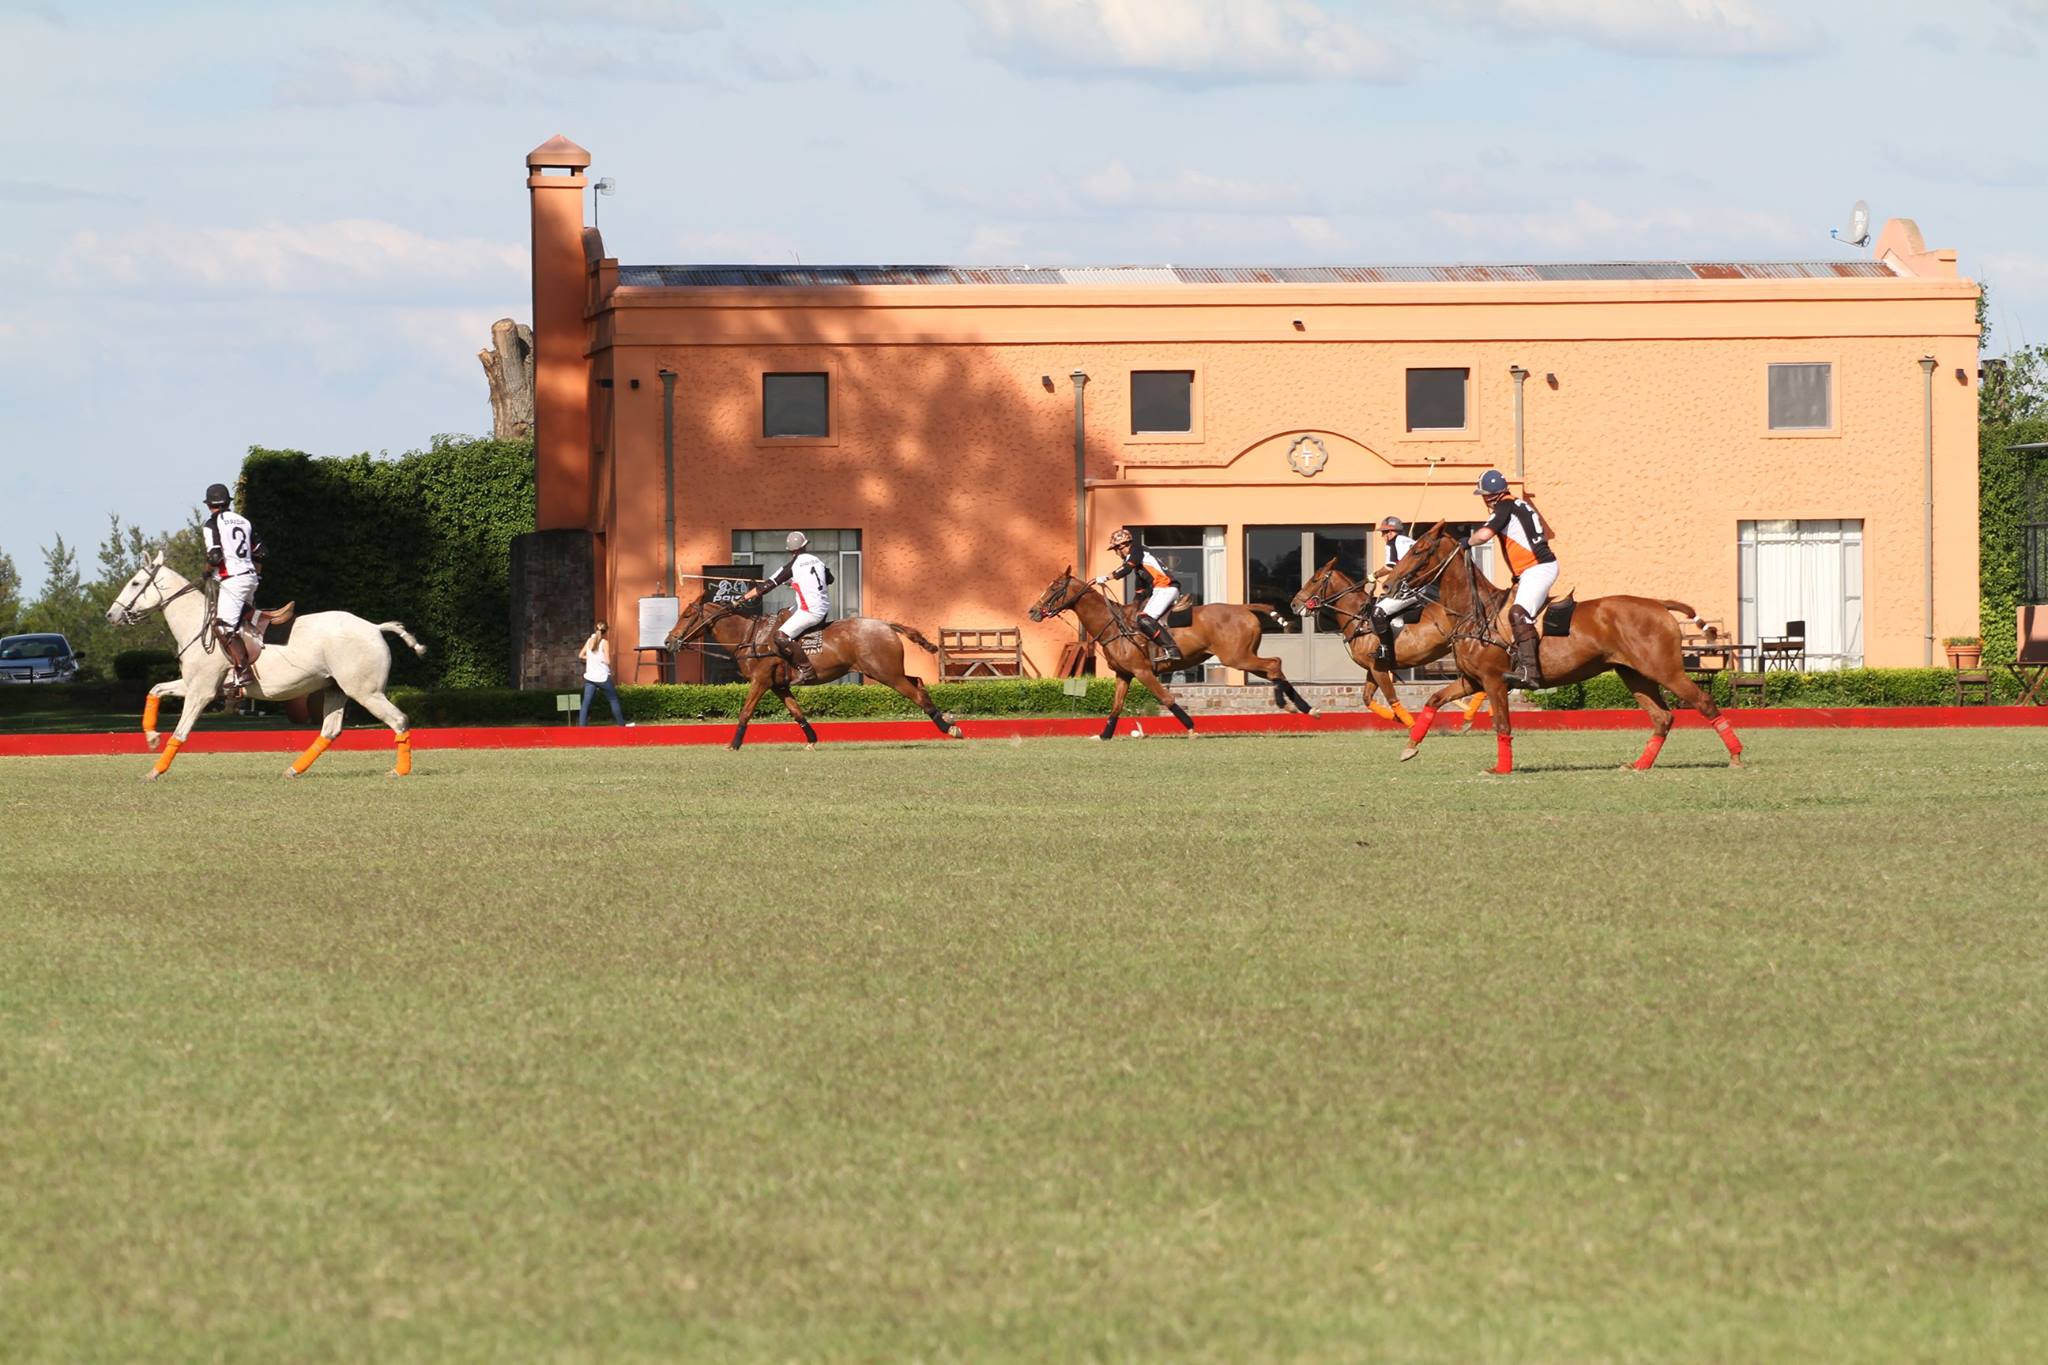 Polo game in Buenos Aires